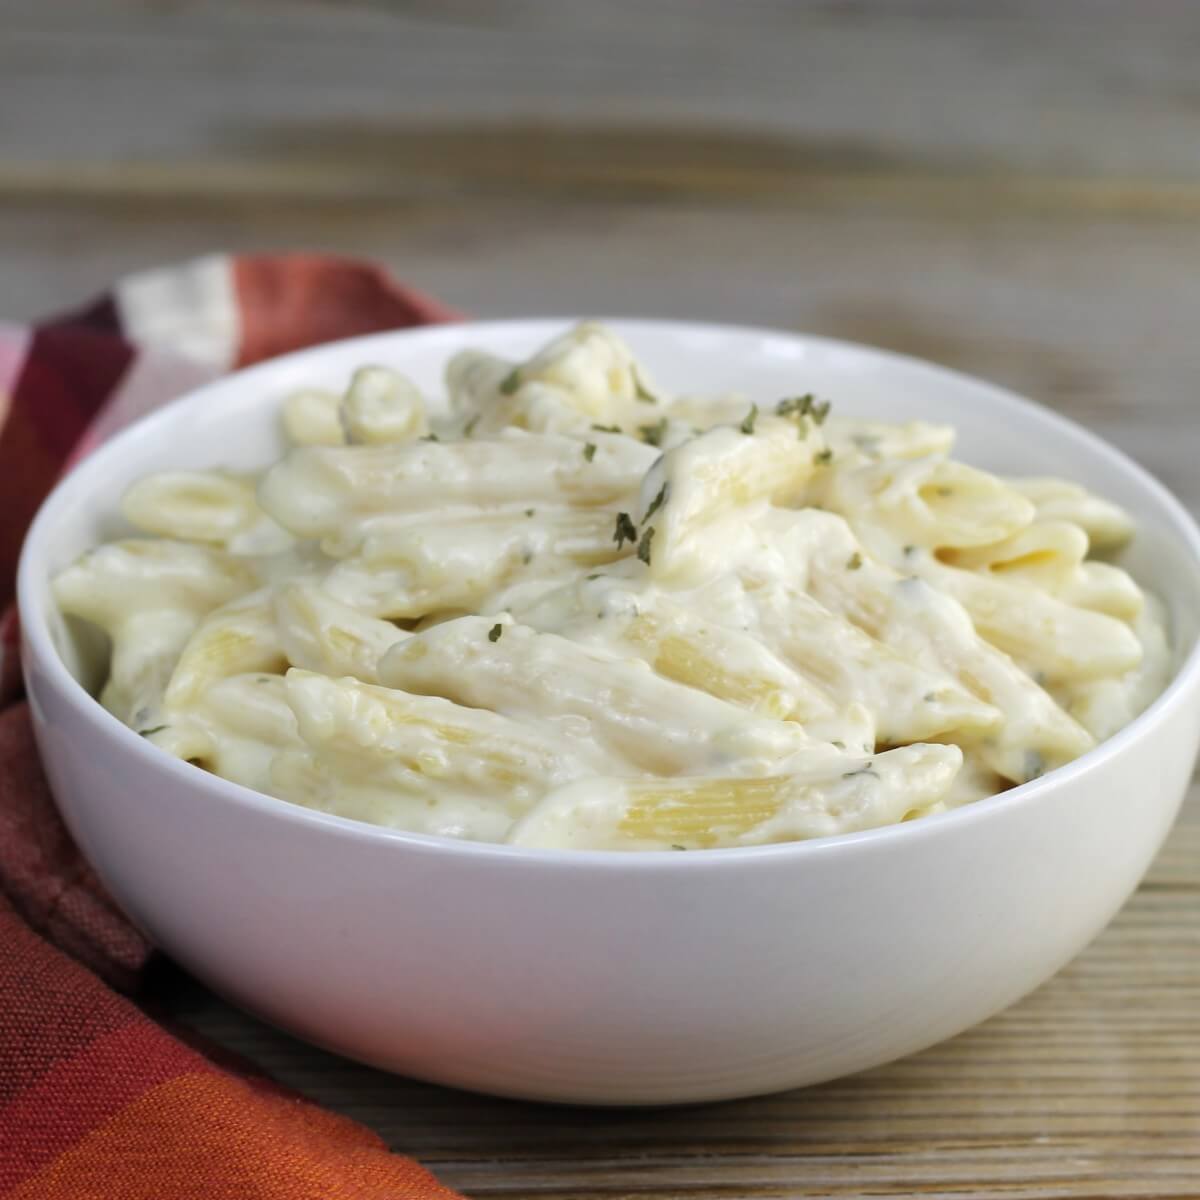 A side angle view of a white bowl of creamy pasta.